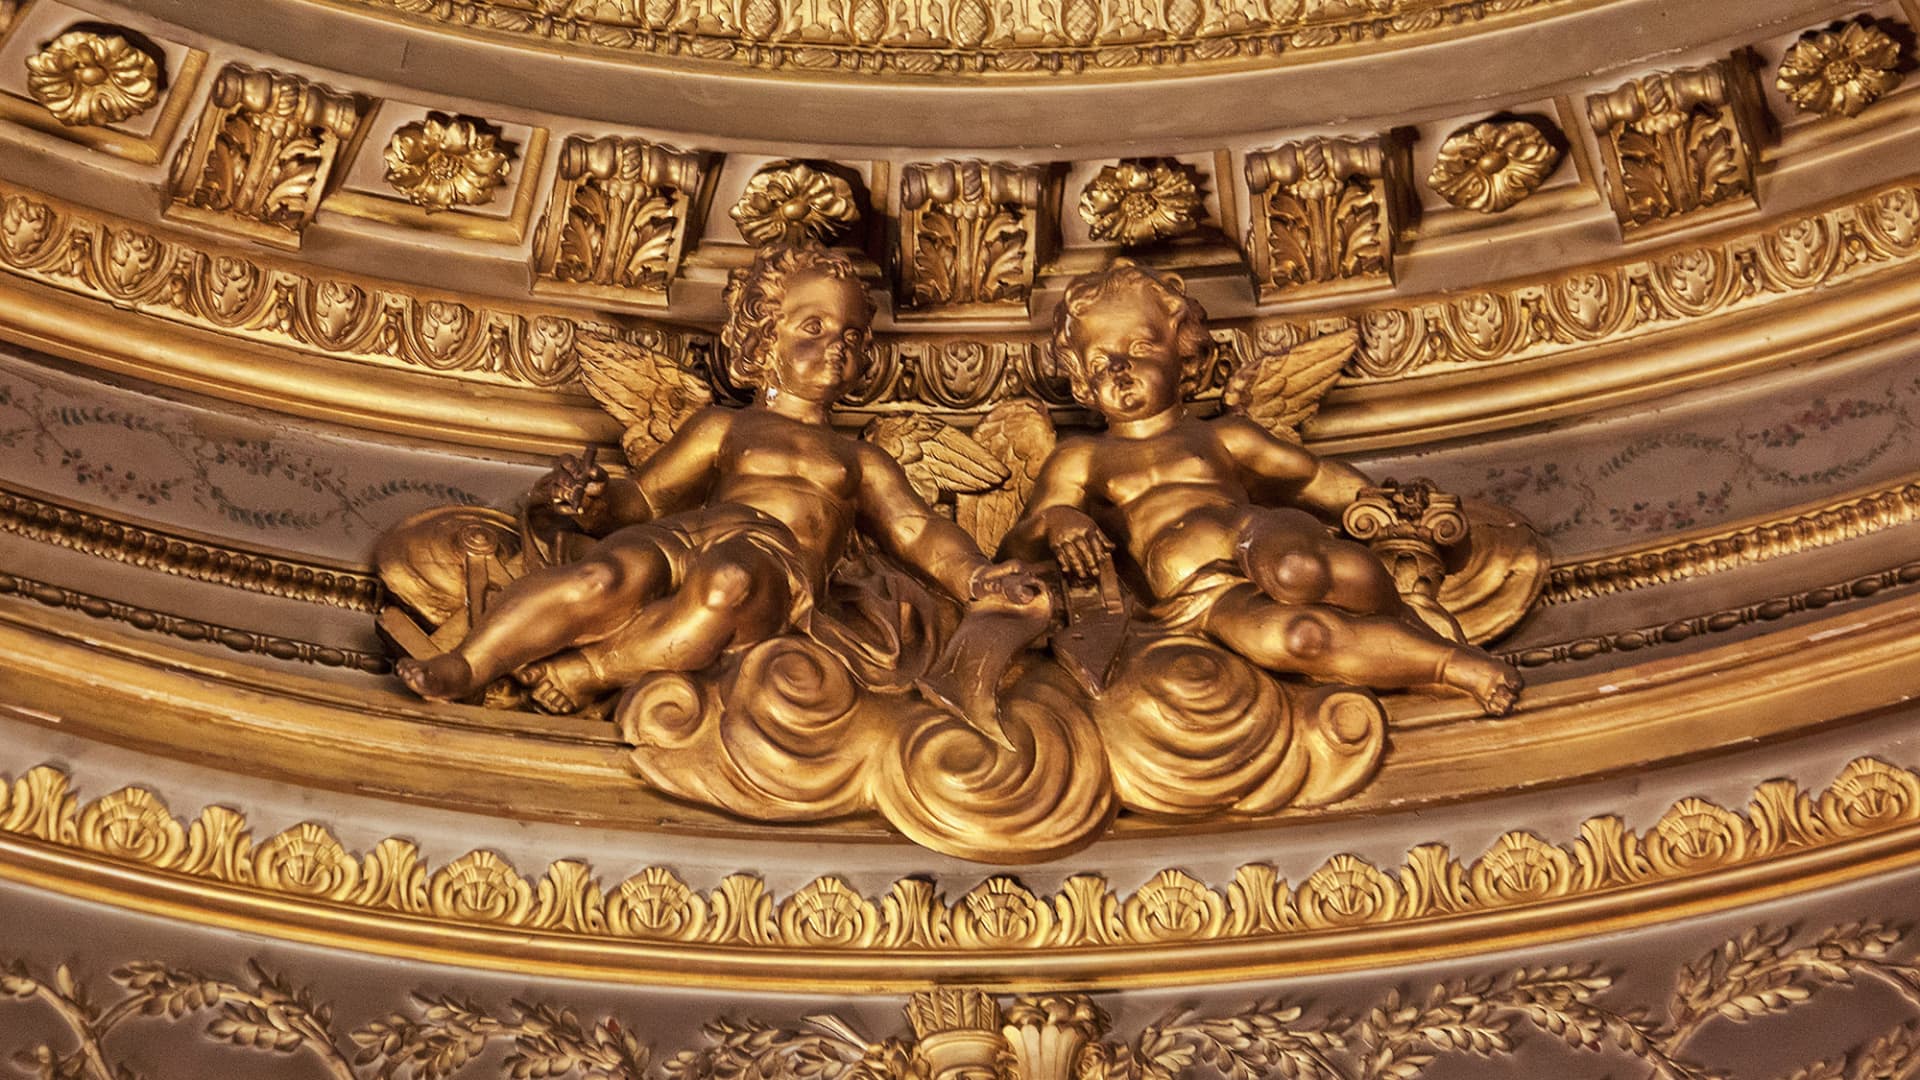 These gold-covered cherubs were commissioned by the Vanderbilt heiress herself.